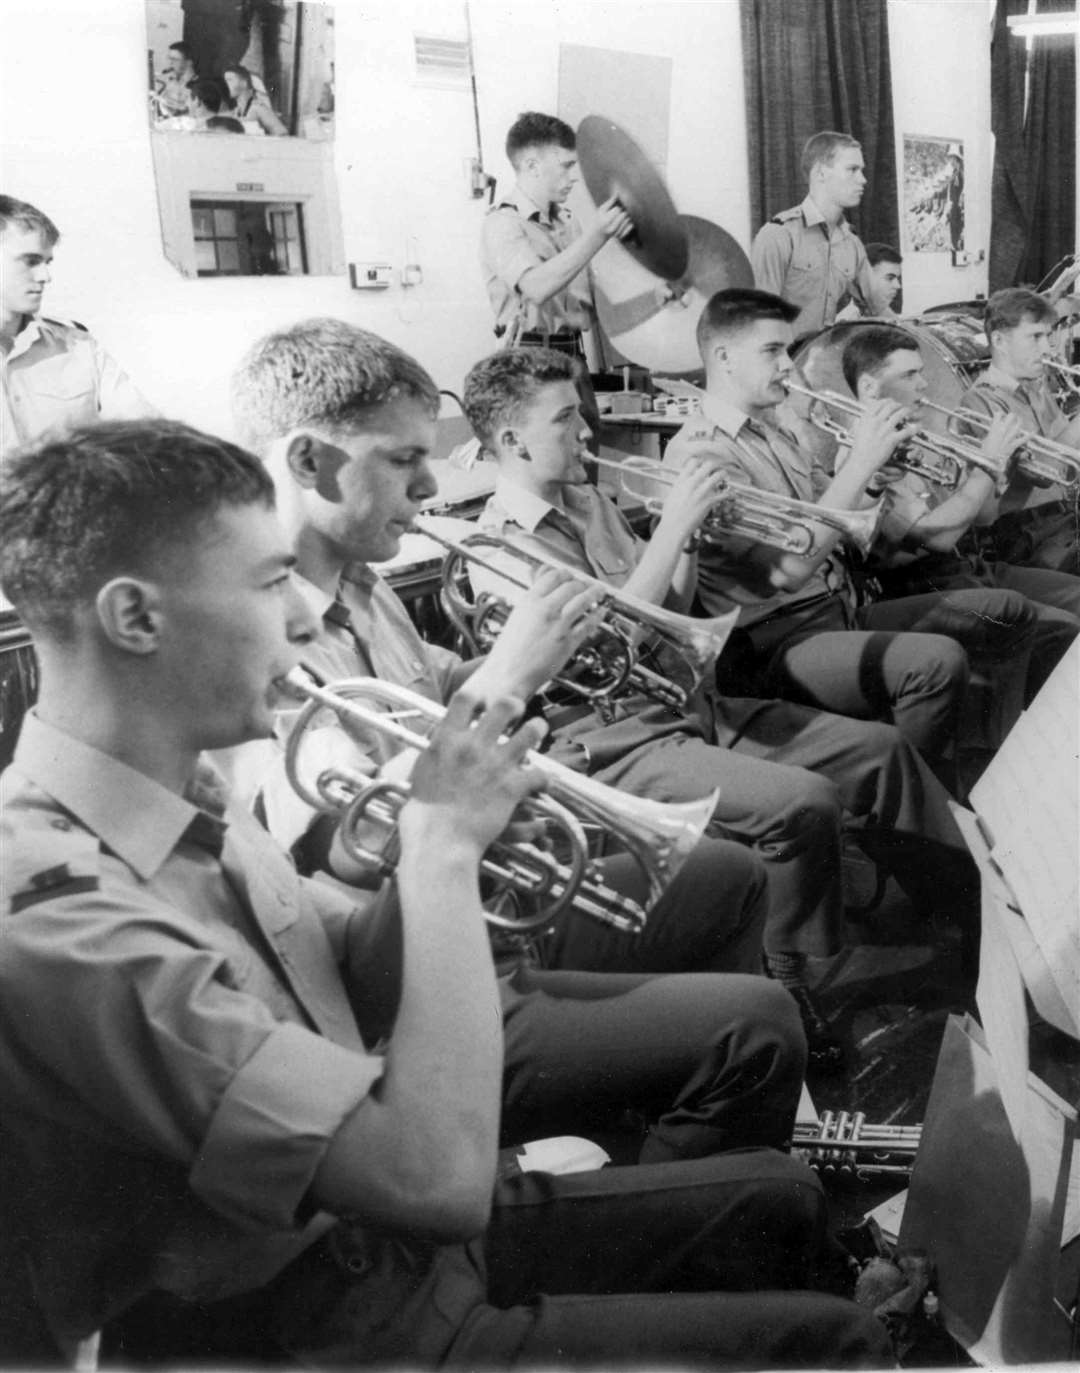 Defiant bandsmen showed the marines fighting spirit by playing just days after the explosion